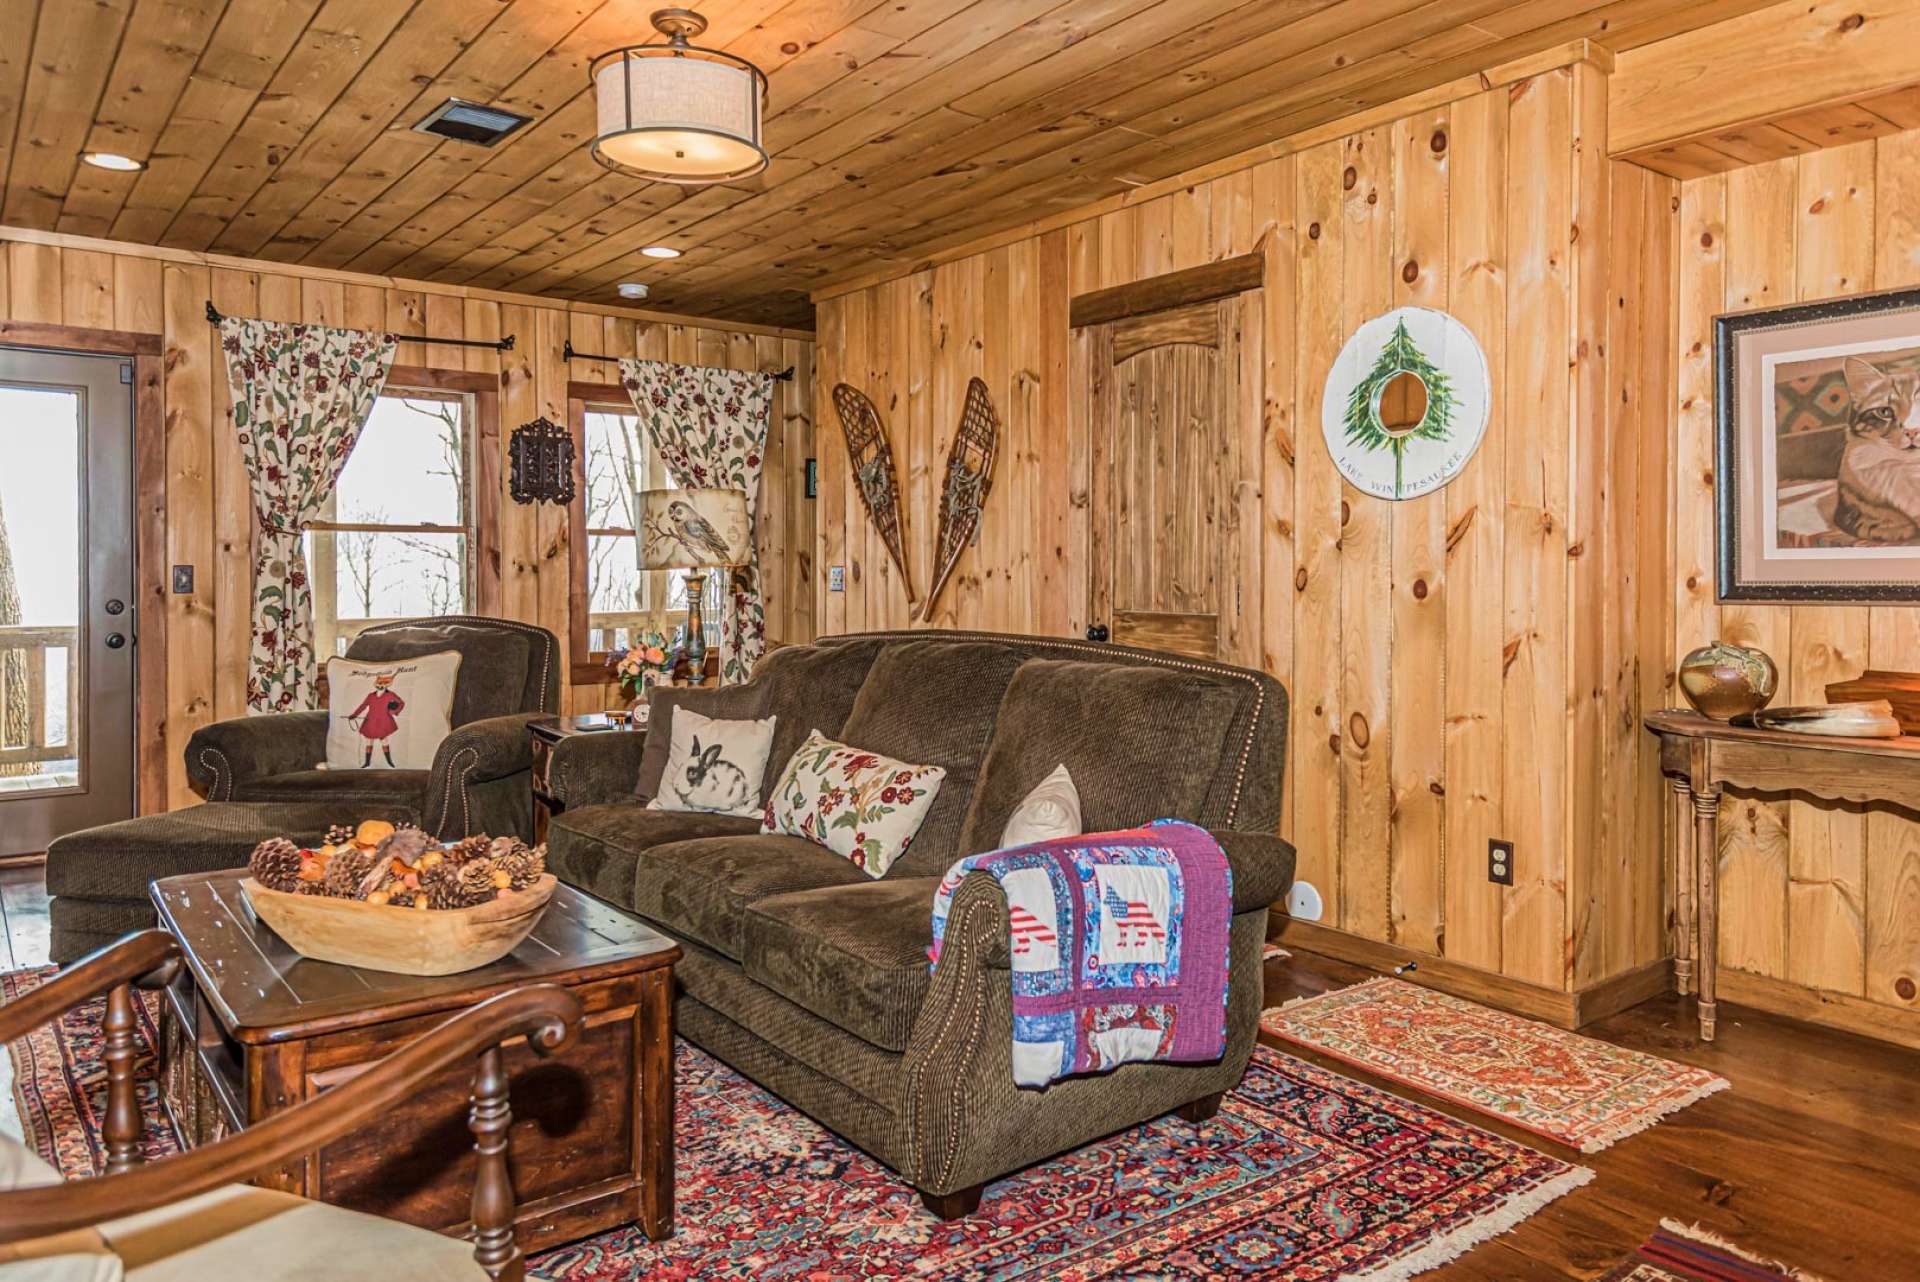 The family room has access to lower level deck, hallway to laundry area and shares a full guest bath with guest bedroom.